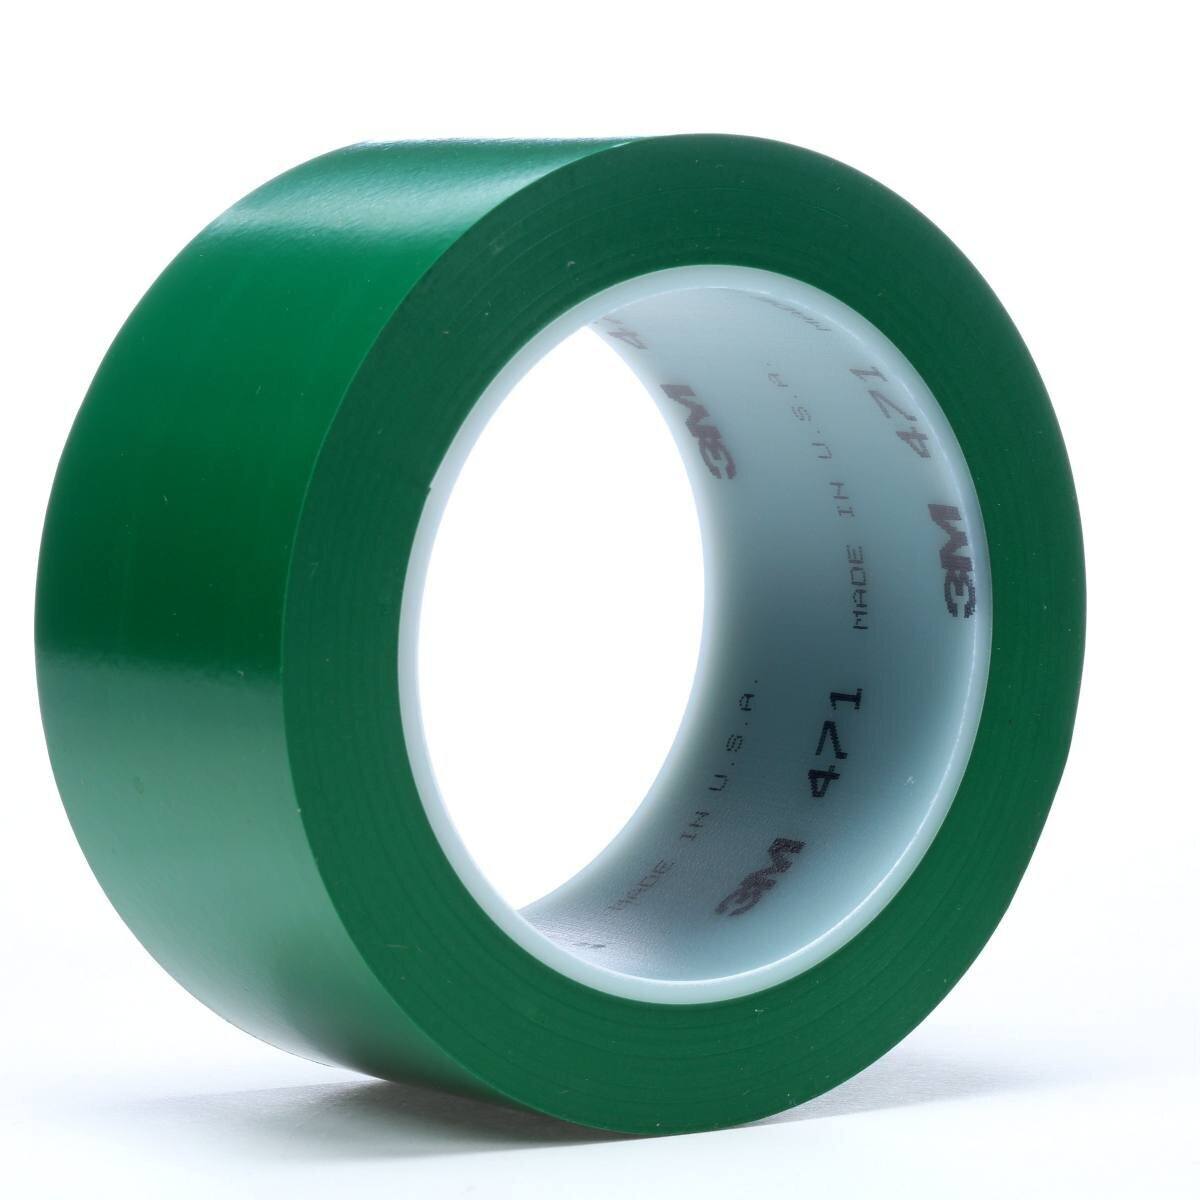 3M soft PVC adhesive tape 471 F, green, 50 mm x 33 m, 0.13 mm, individually and practically packed